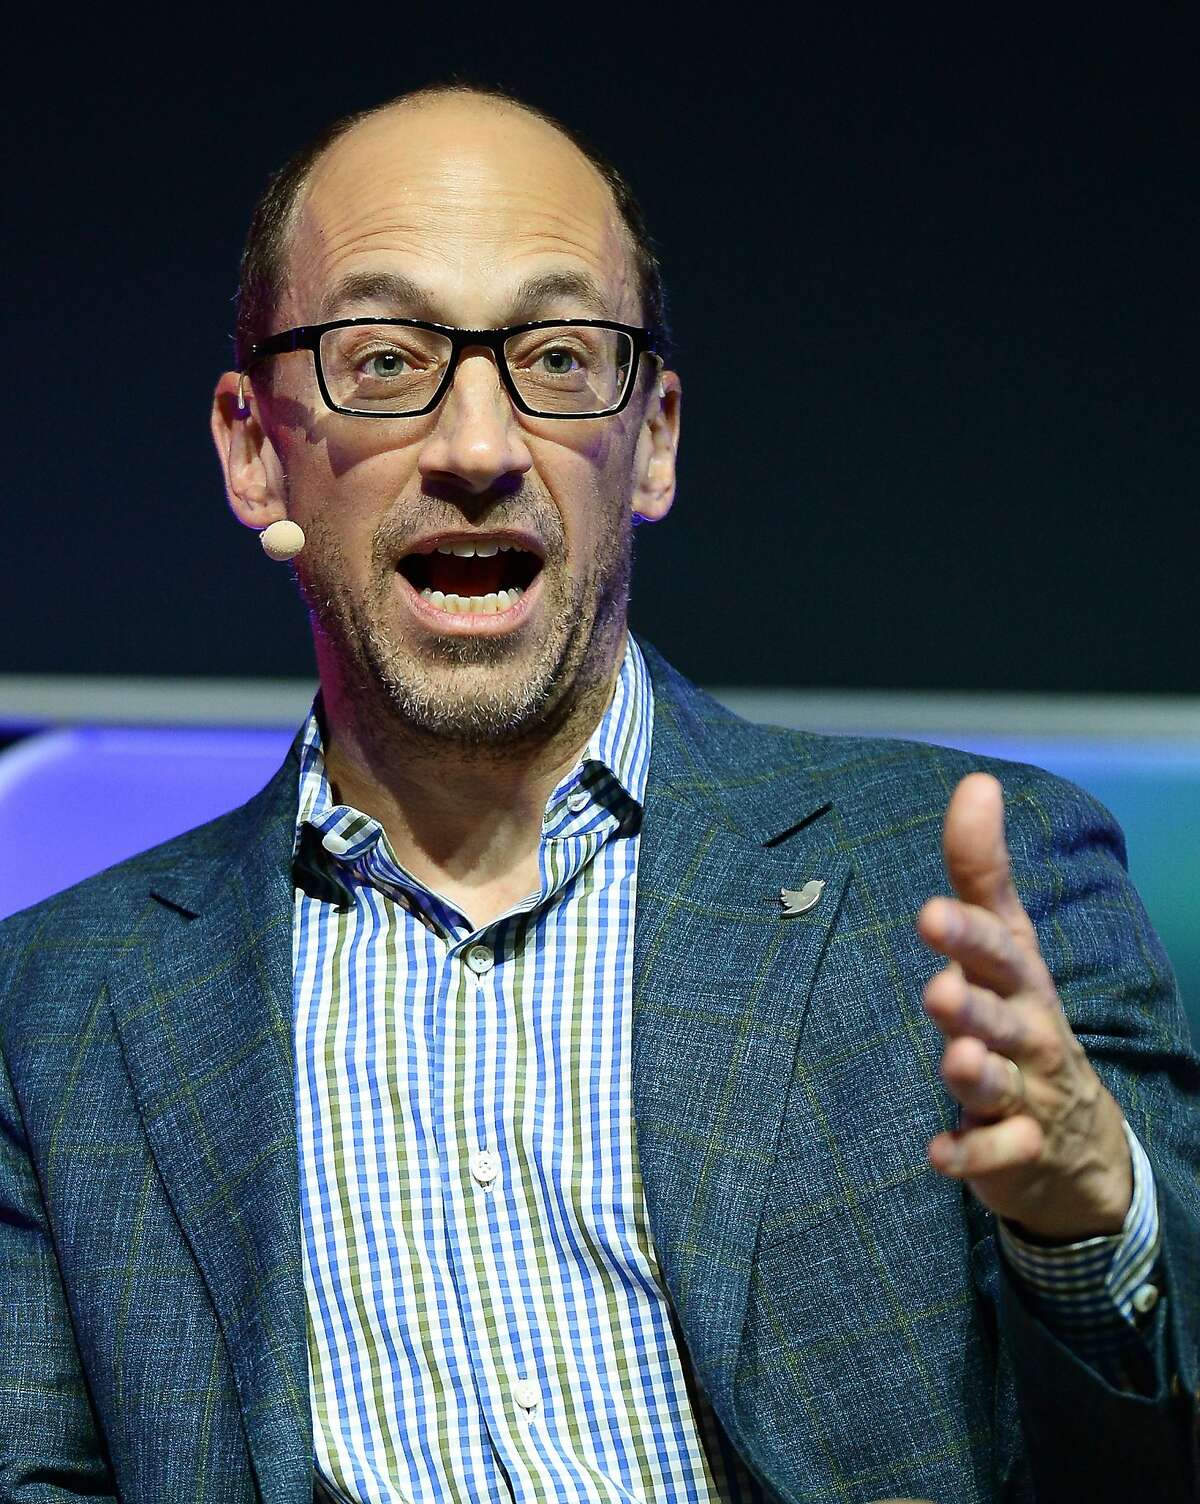 FILE - JUNE 11: According to reports, Dick Costolo is stepping down as Chief Executive Officer of Twitter effective July 1st, and will be replaced by Jack Dorsey as Interim CEO, June 11, 2015. LAS VEGAS, NV - JANUARY 08: Twitter CEO Dick Costolo speaks during the Brand Matters keynote address at the 2014 International CES at The Las Vegas Hotel & Casino on January 8, 2014 in Las Vegas, Nevada. CES, the world's largest annual consumer technology trade show, runs through January 10 and is expected to feature 3,200 exhibitors showing off their latest products and services to about 150,000 attendees. (Photo by Ethan Miller/Getty Images)